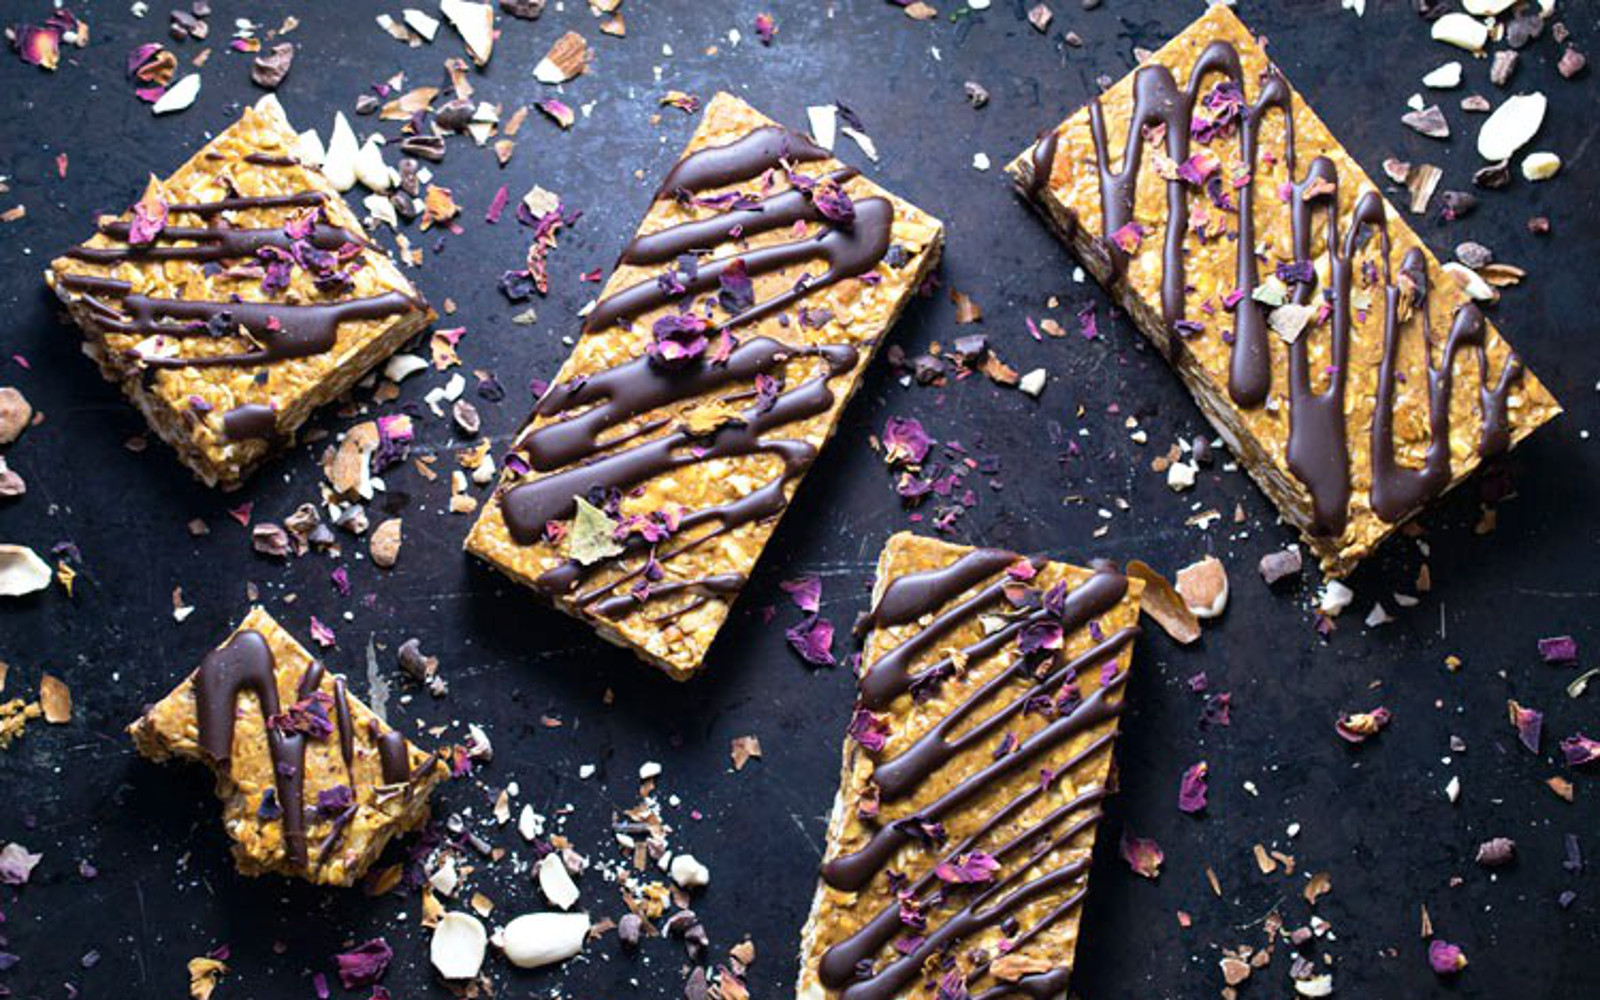 10-Minute Superfood Protein Bars